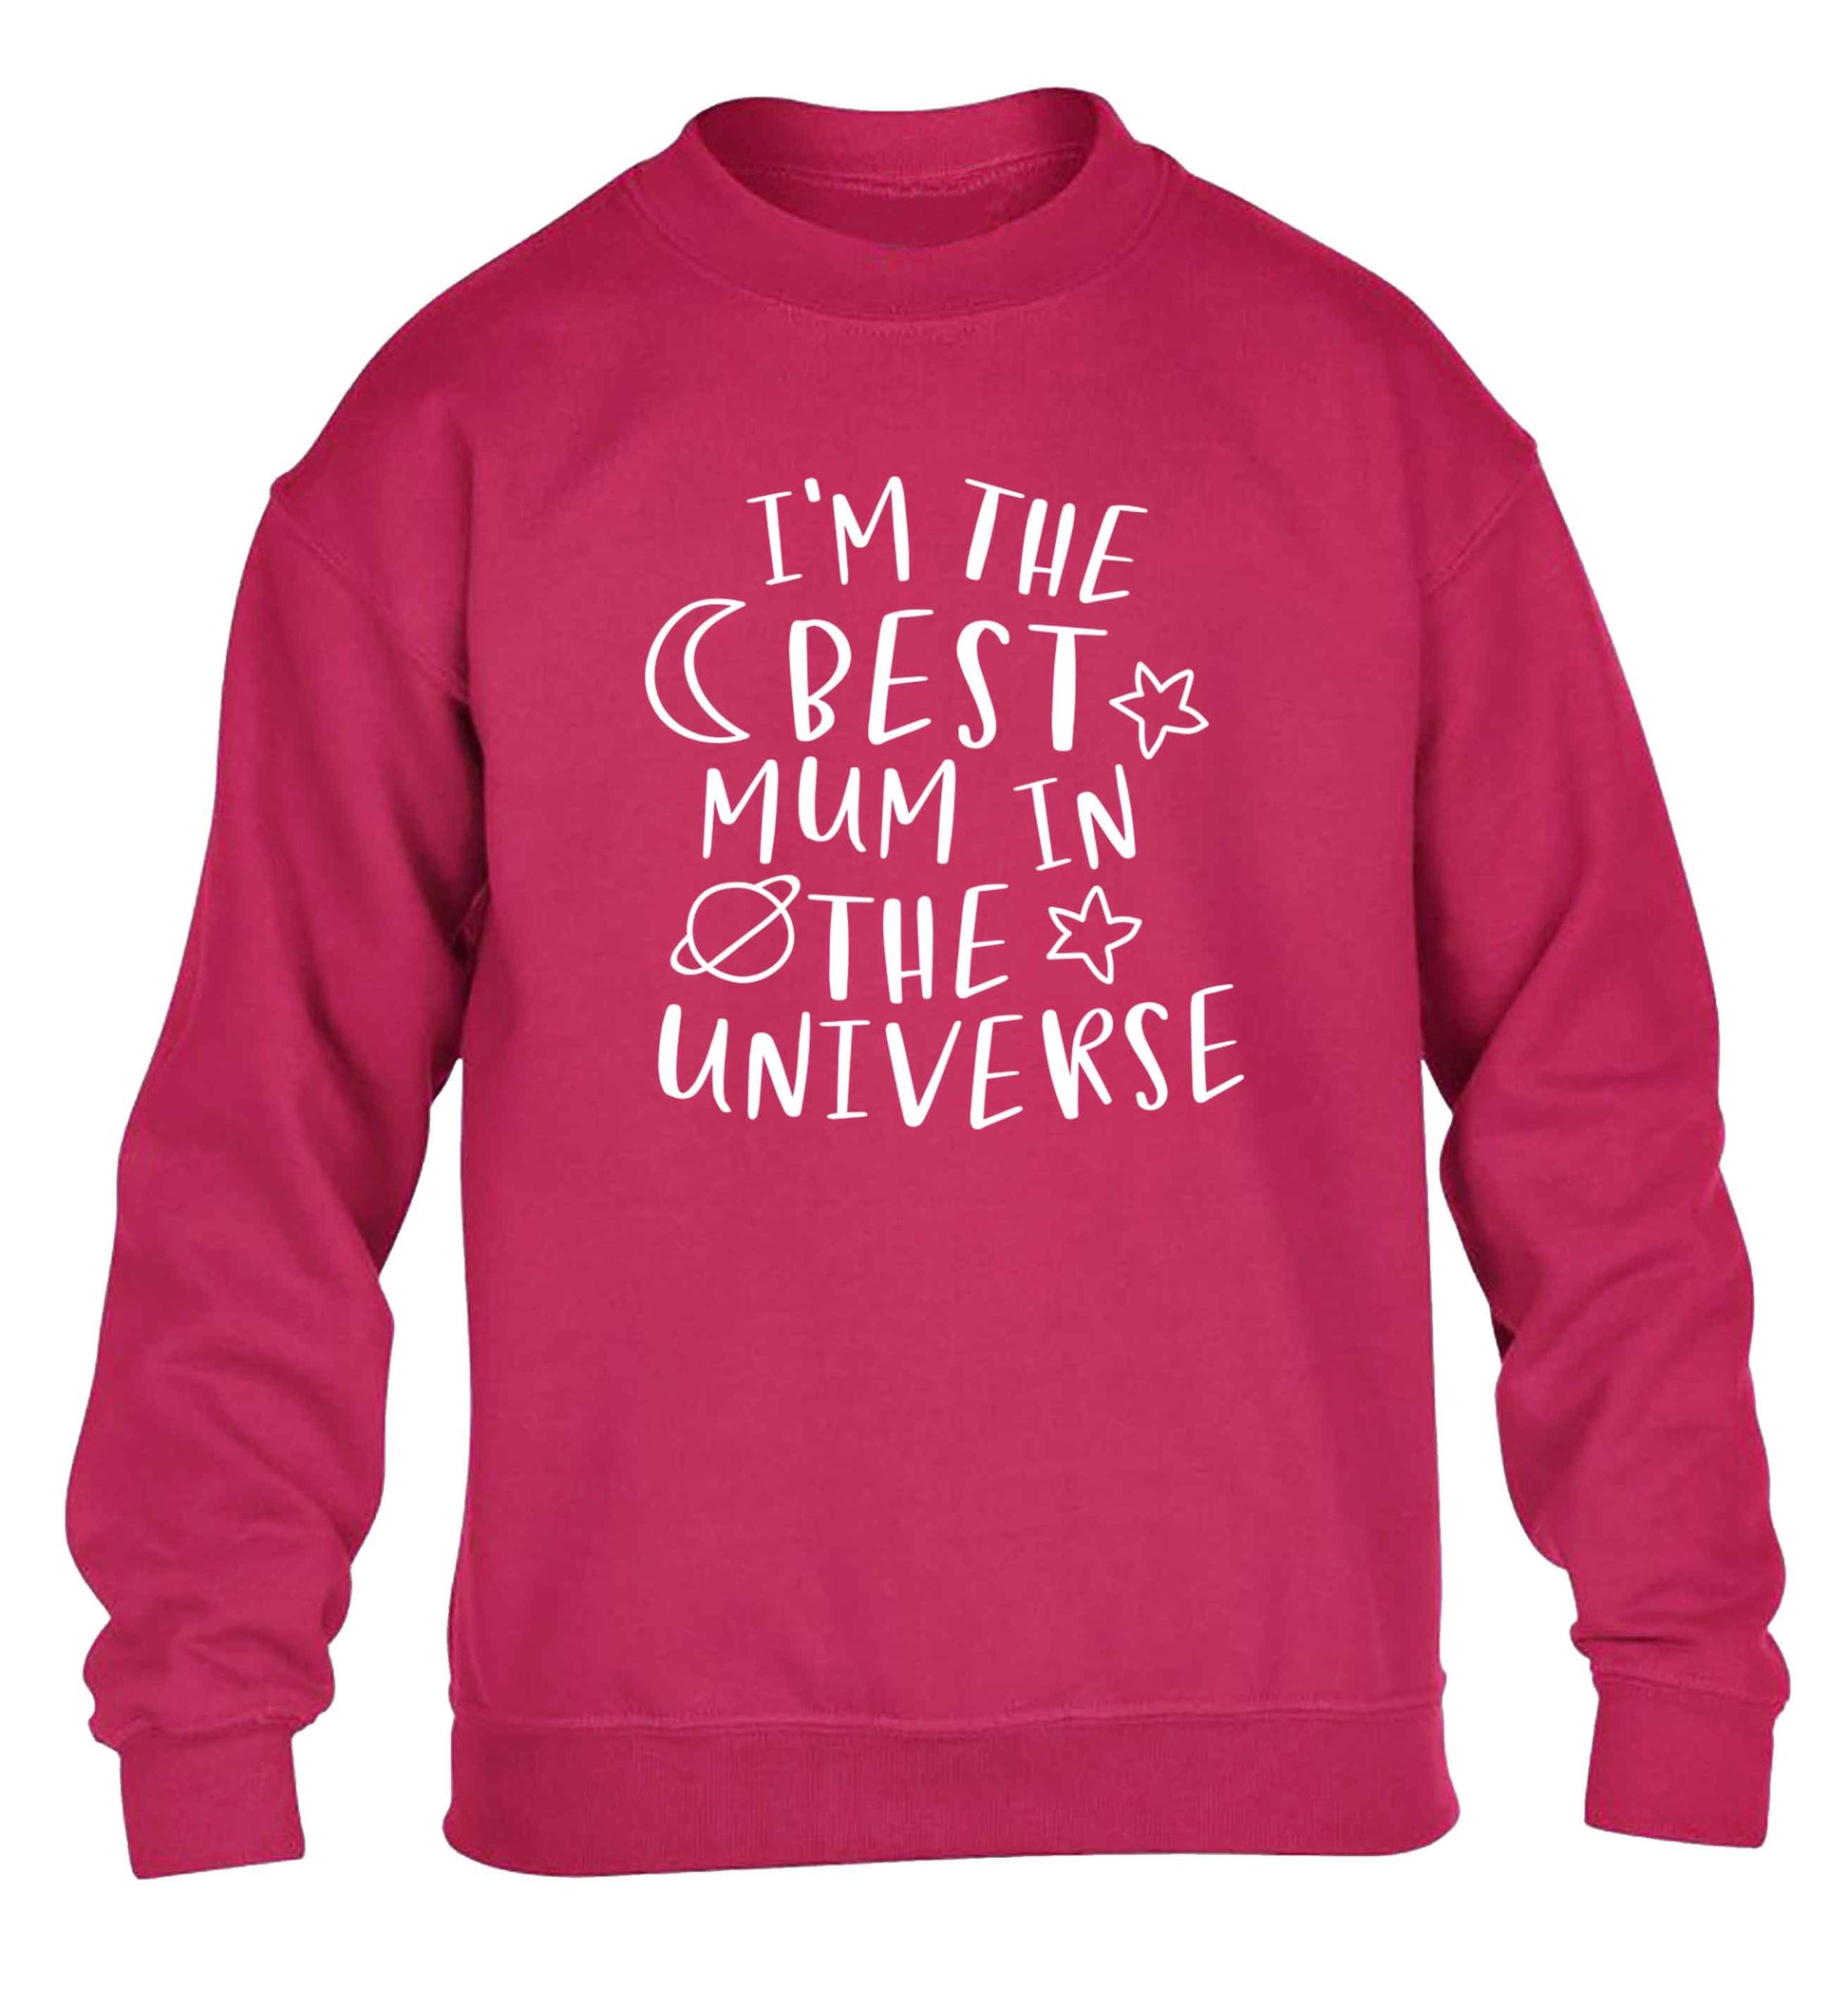 I'm the best mum in the universe children's pink sweater 12-13 Years